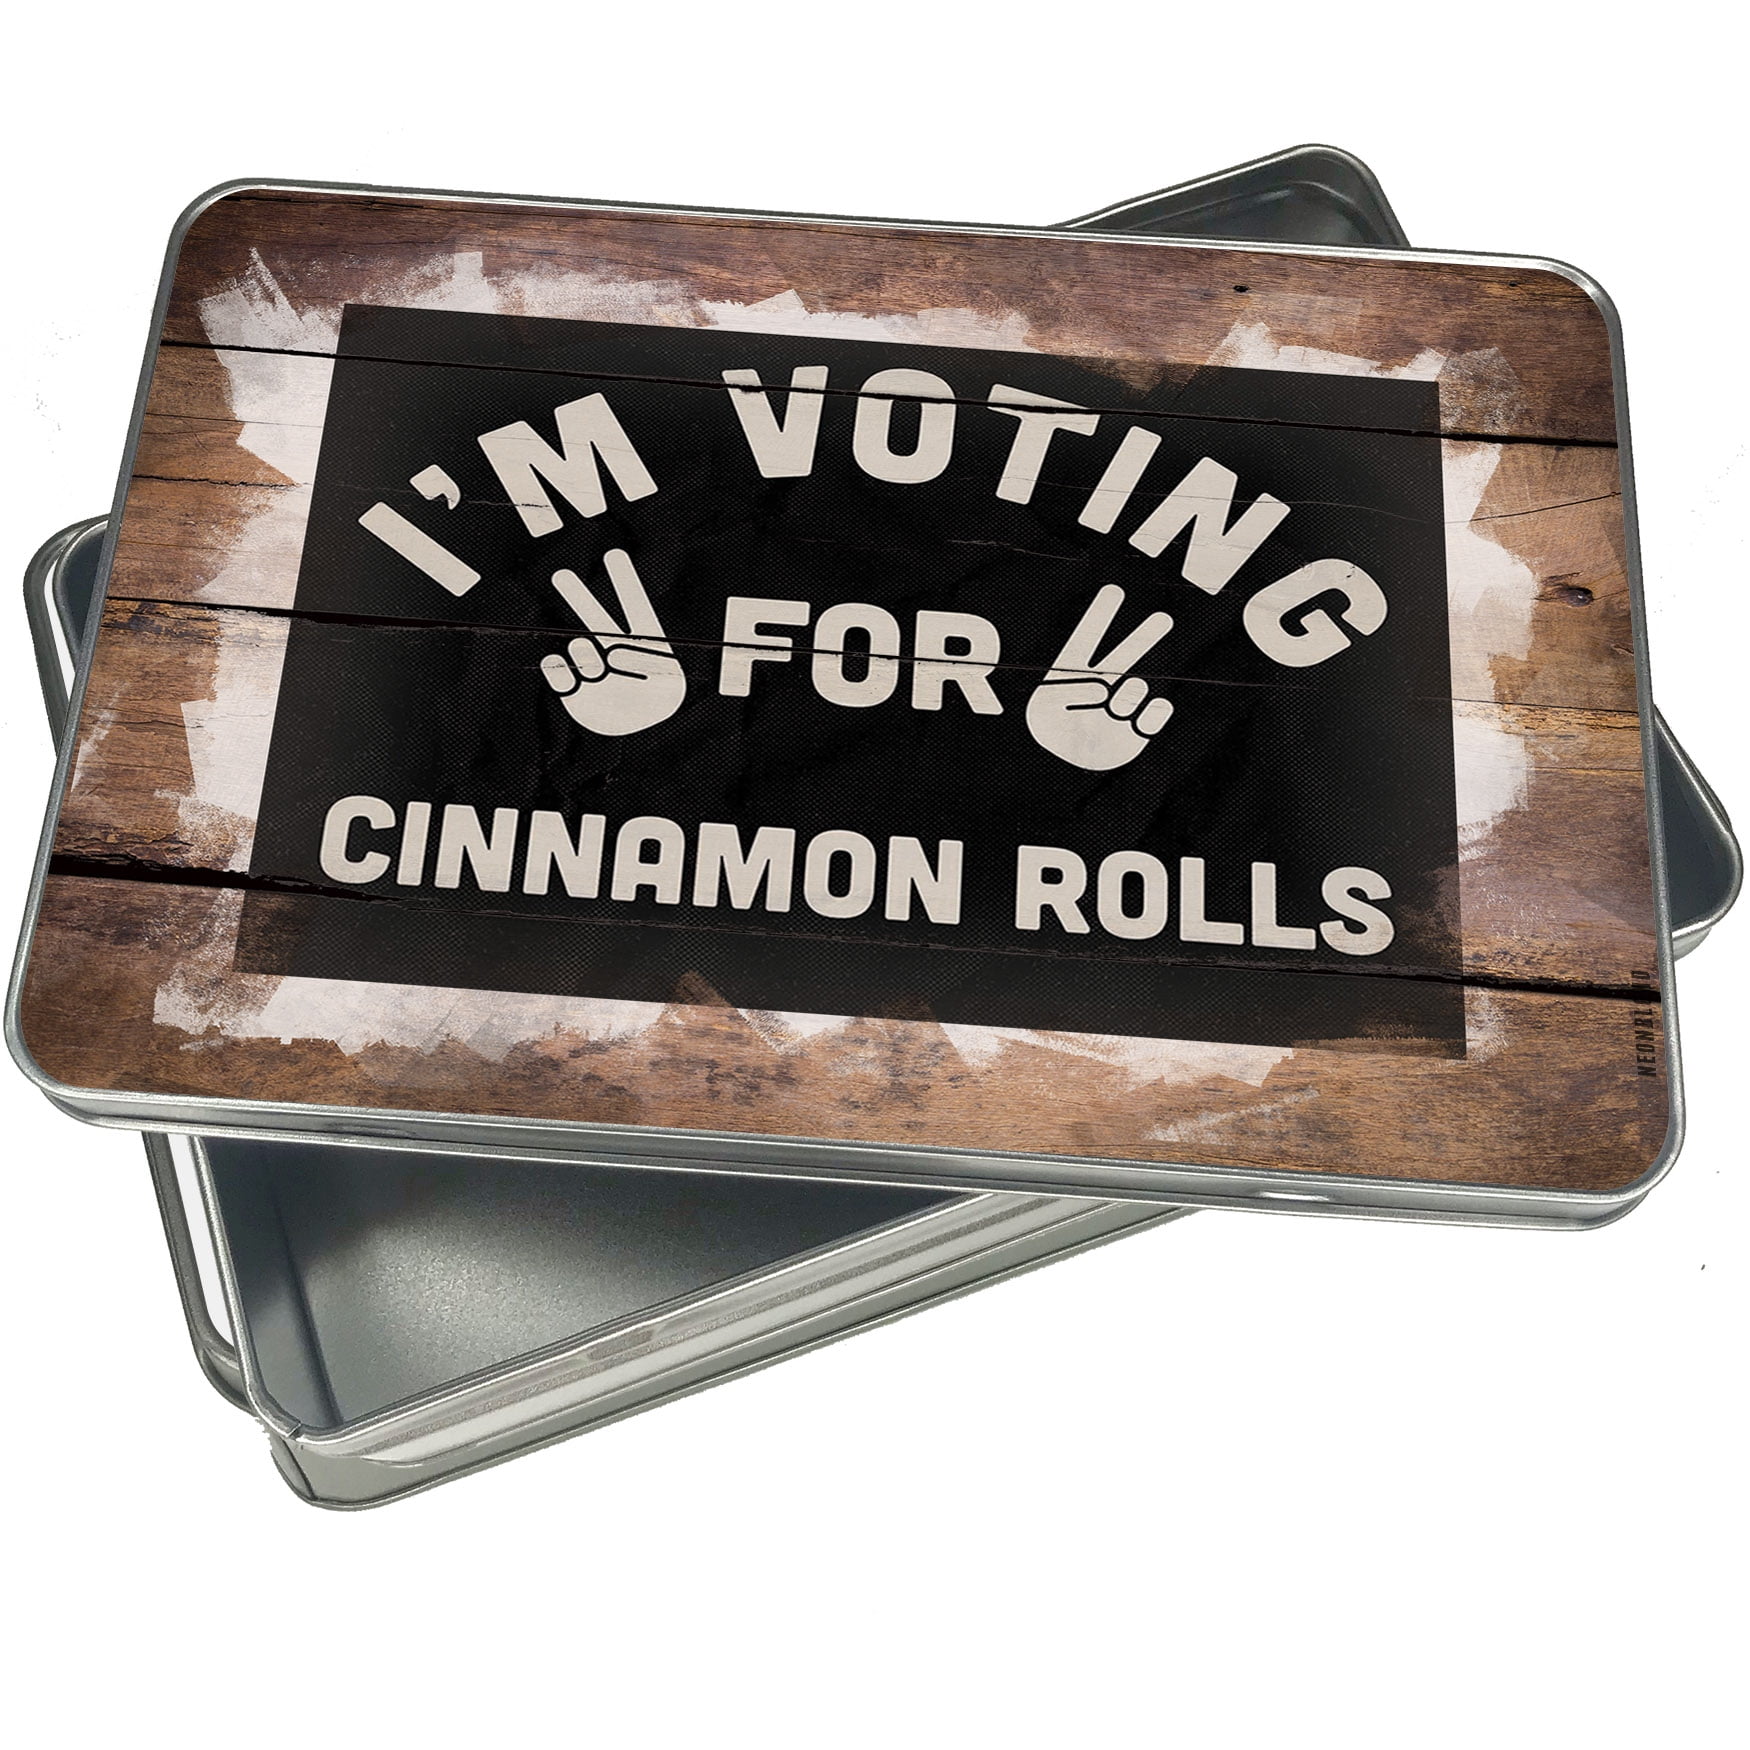 Christmas Cookie Tin Im Voting For Cinnamon Rolls Funny Saying for Gift Giving Empty Candy Snack Pastry Treat Swap Box Cerebrate a Holiday